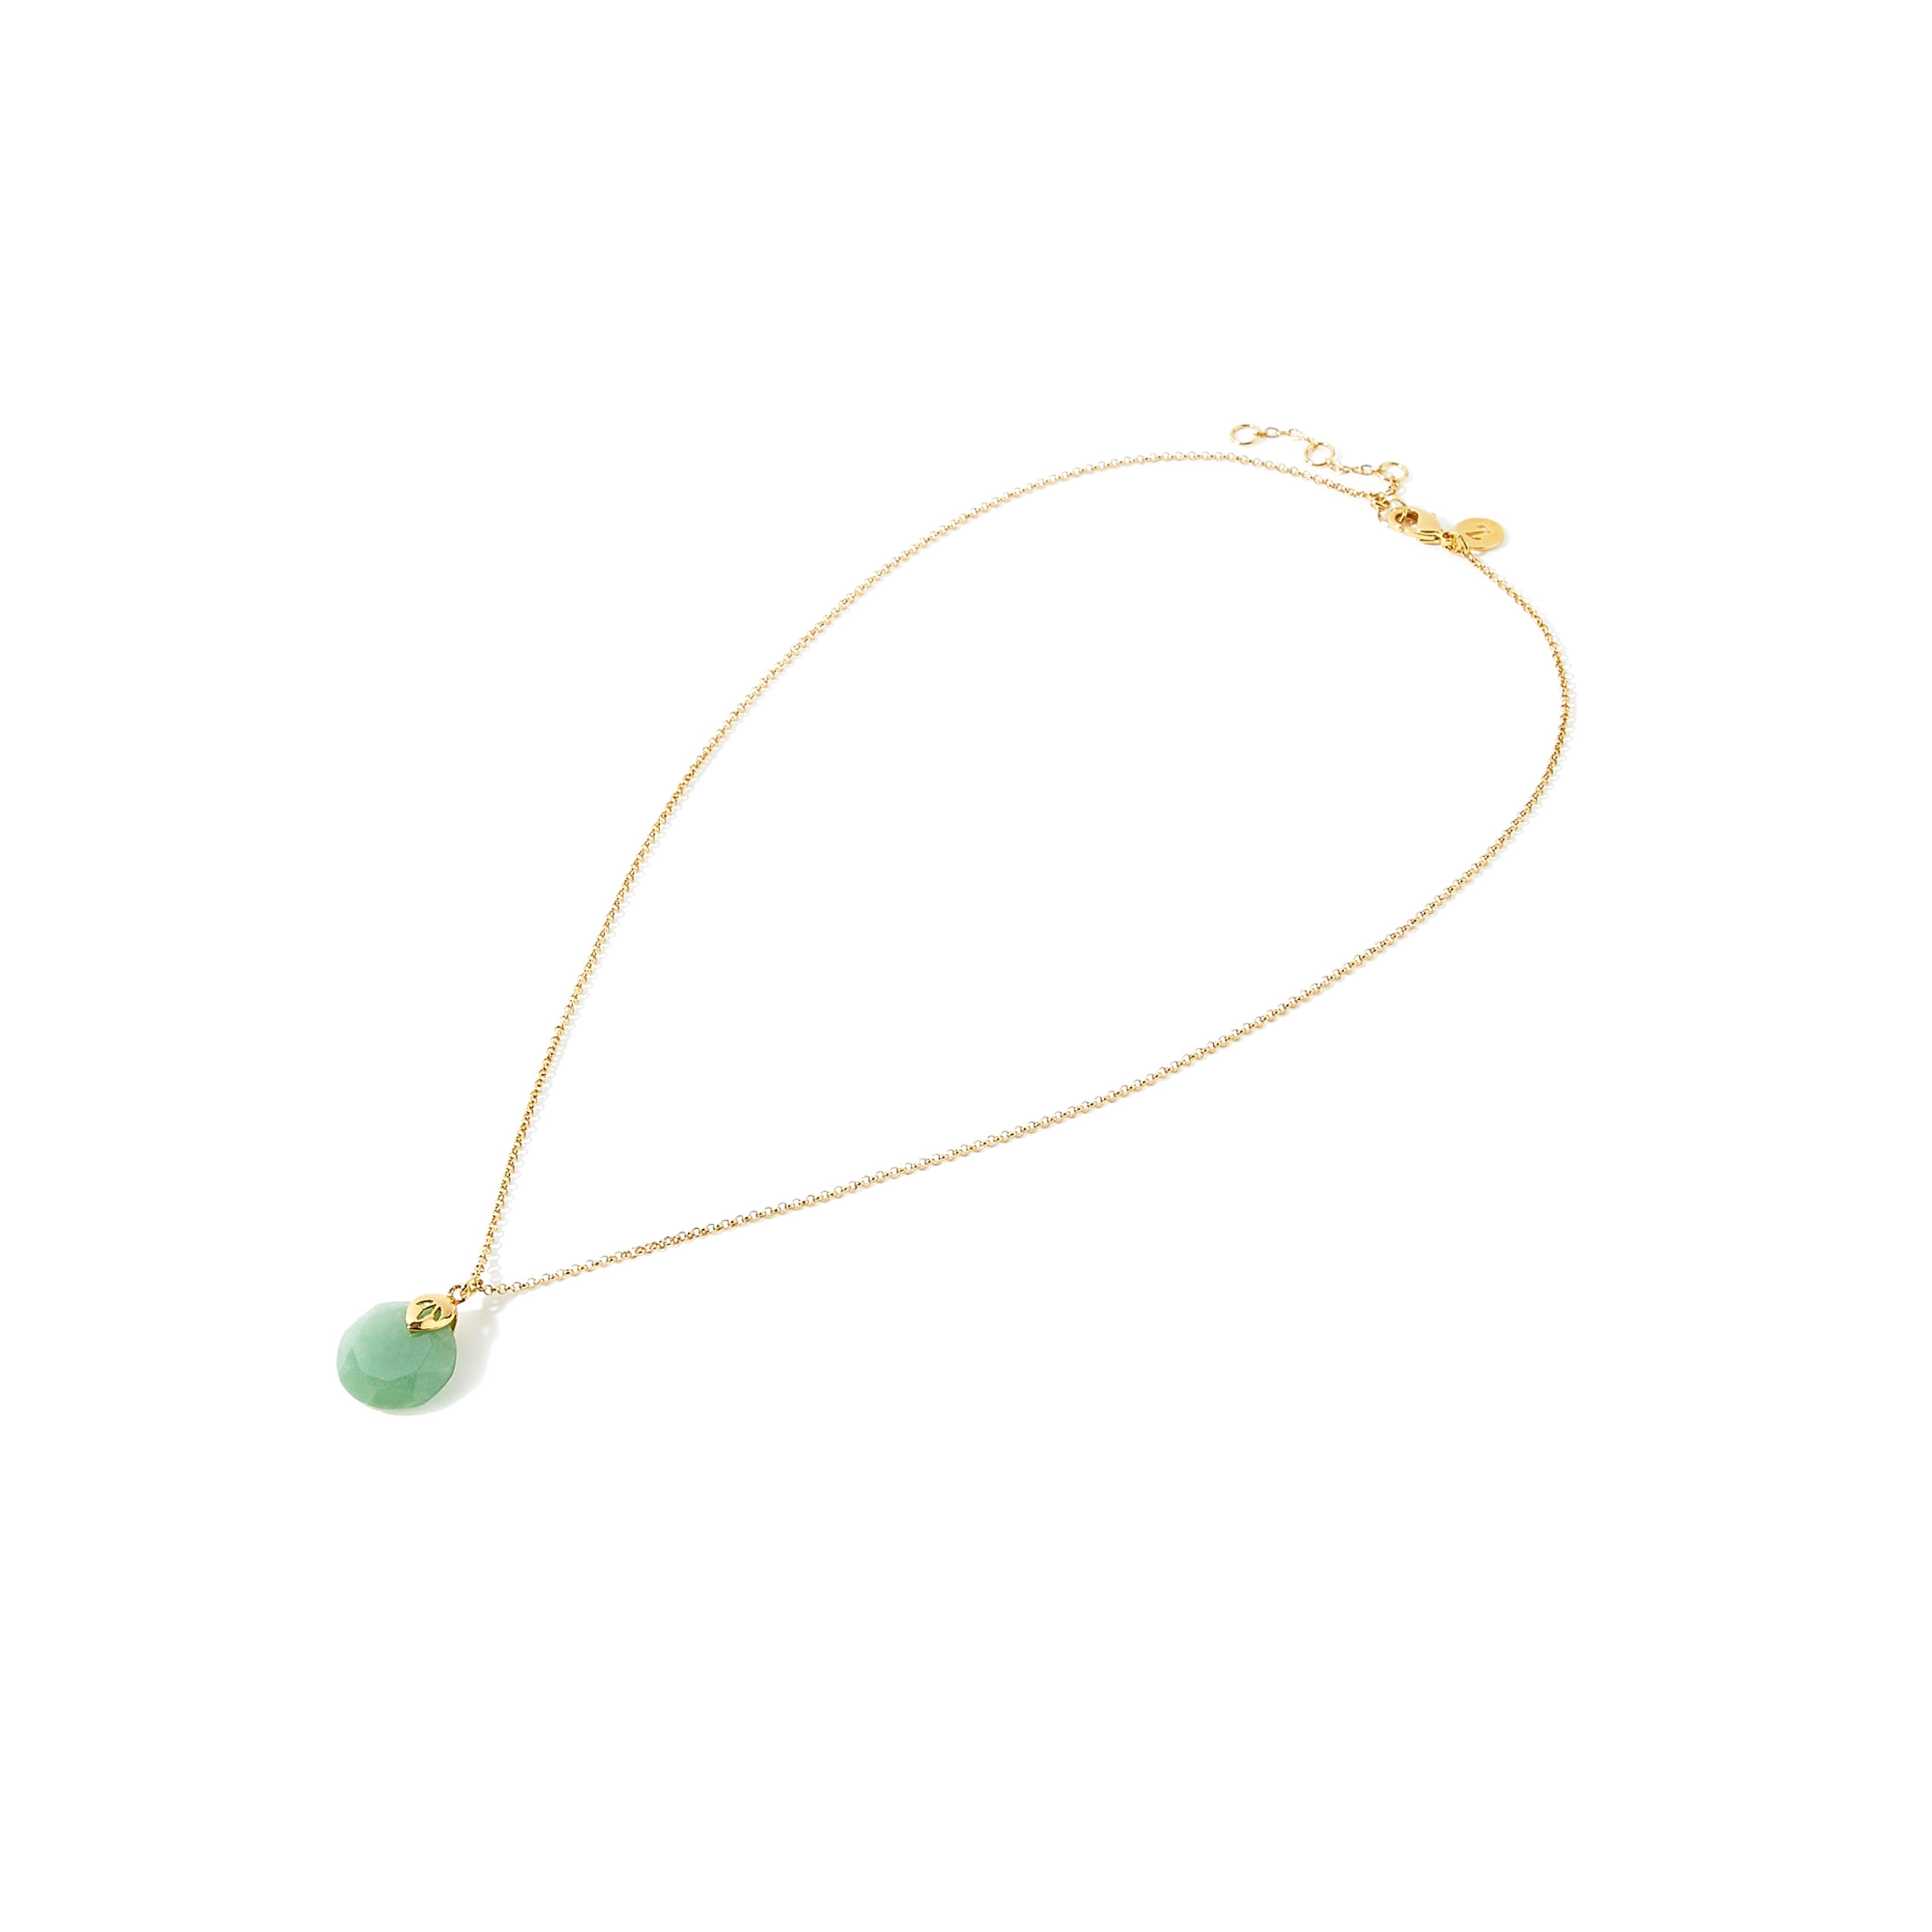 Real Gold Plated Circle Healing Stone Pendant Necklace Aventurine For Women By Accessorize London